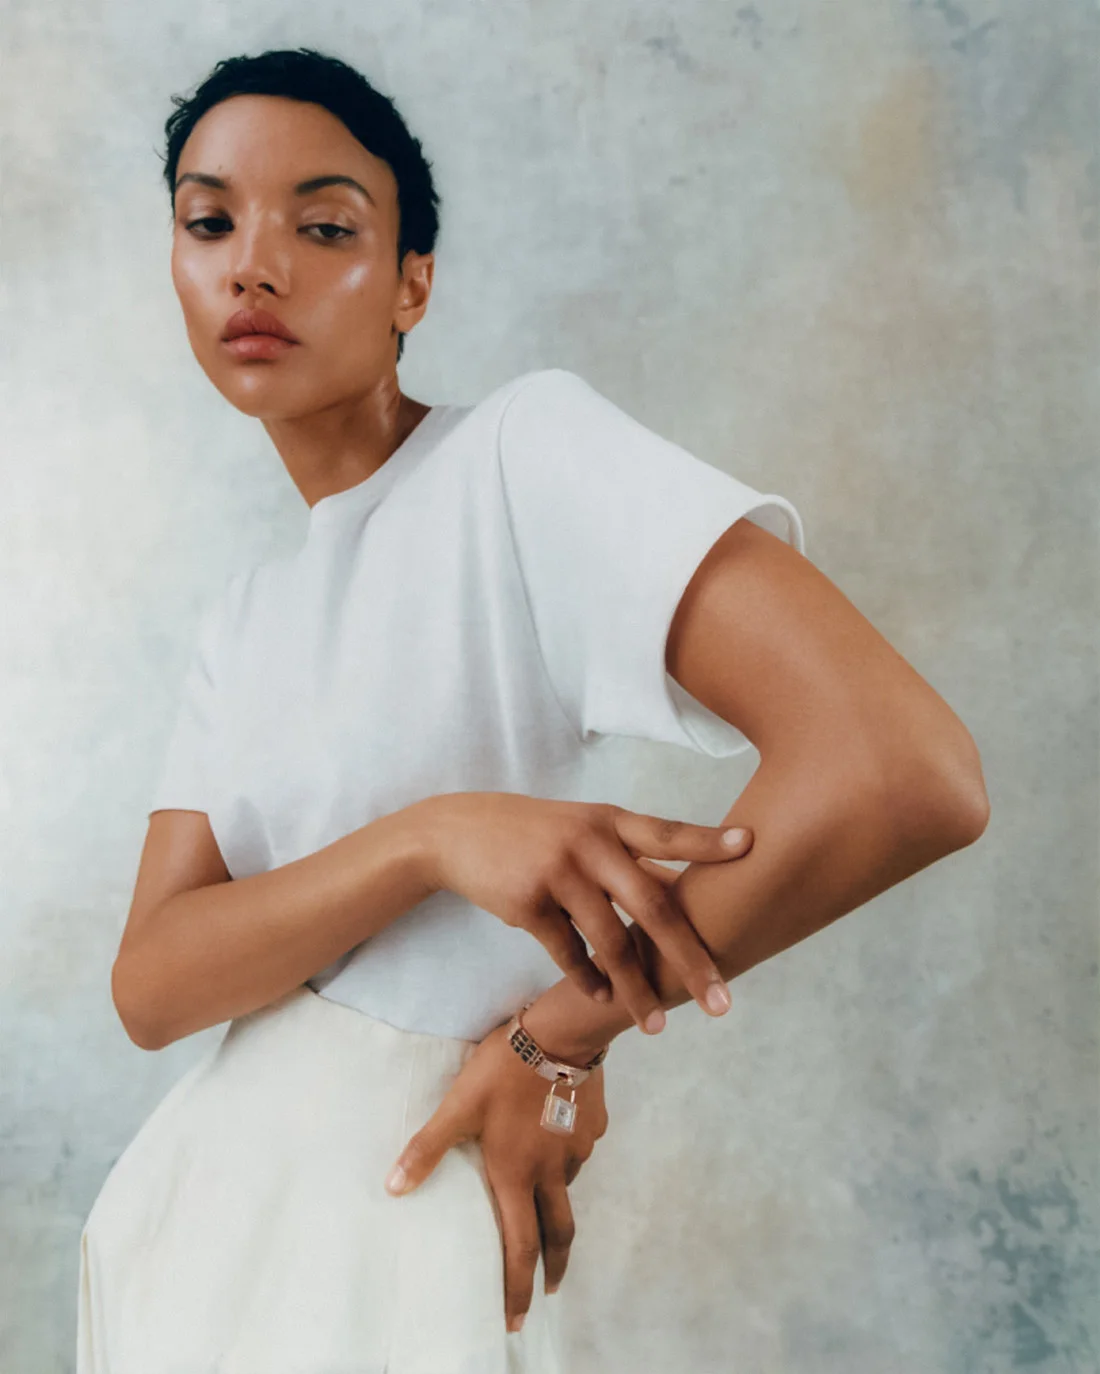 Georgia Palmer covers British Vogue Watches May 2022 by Felicity Ingram